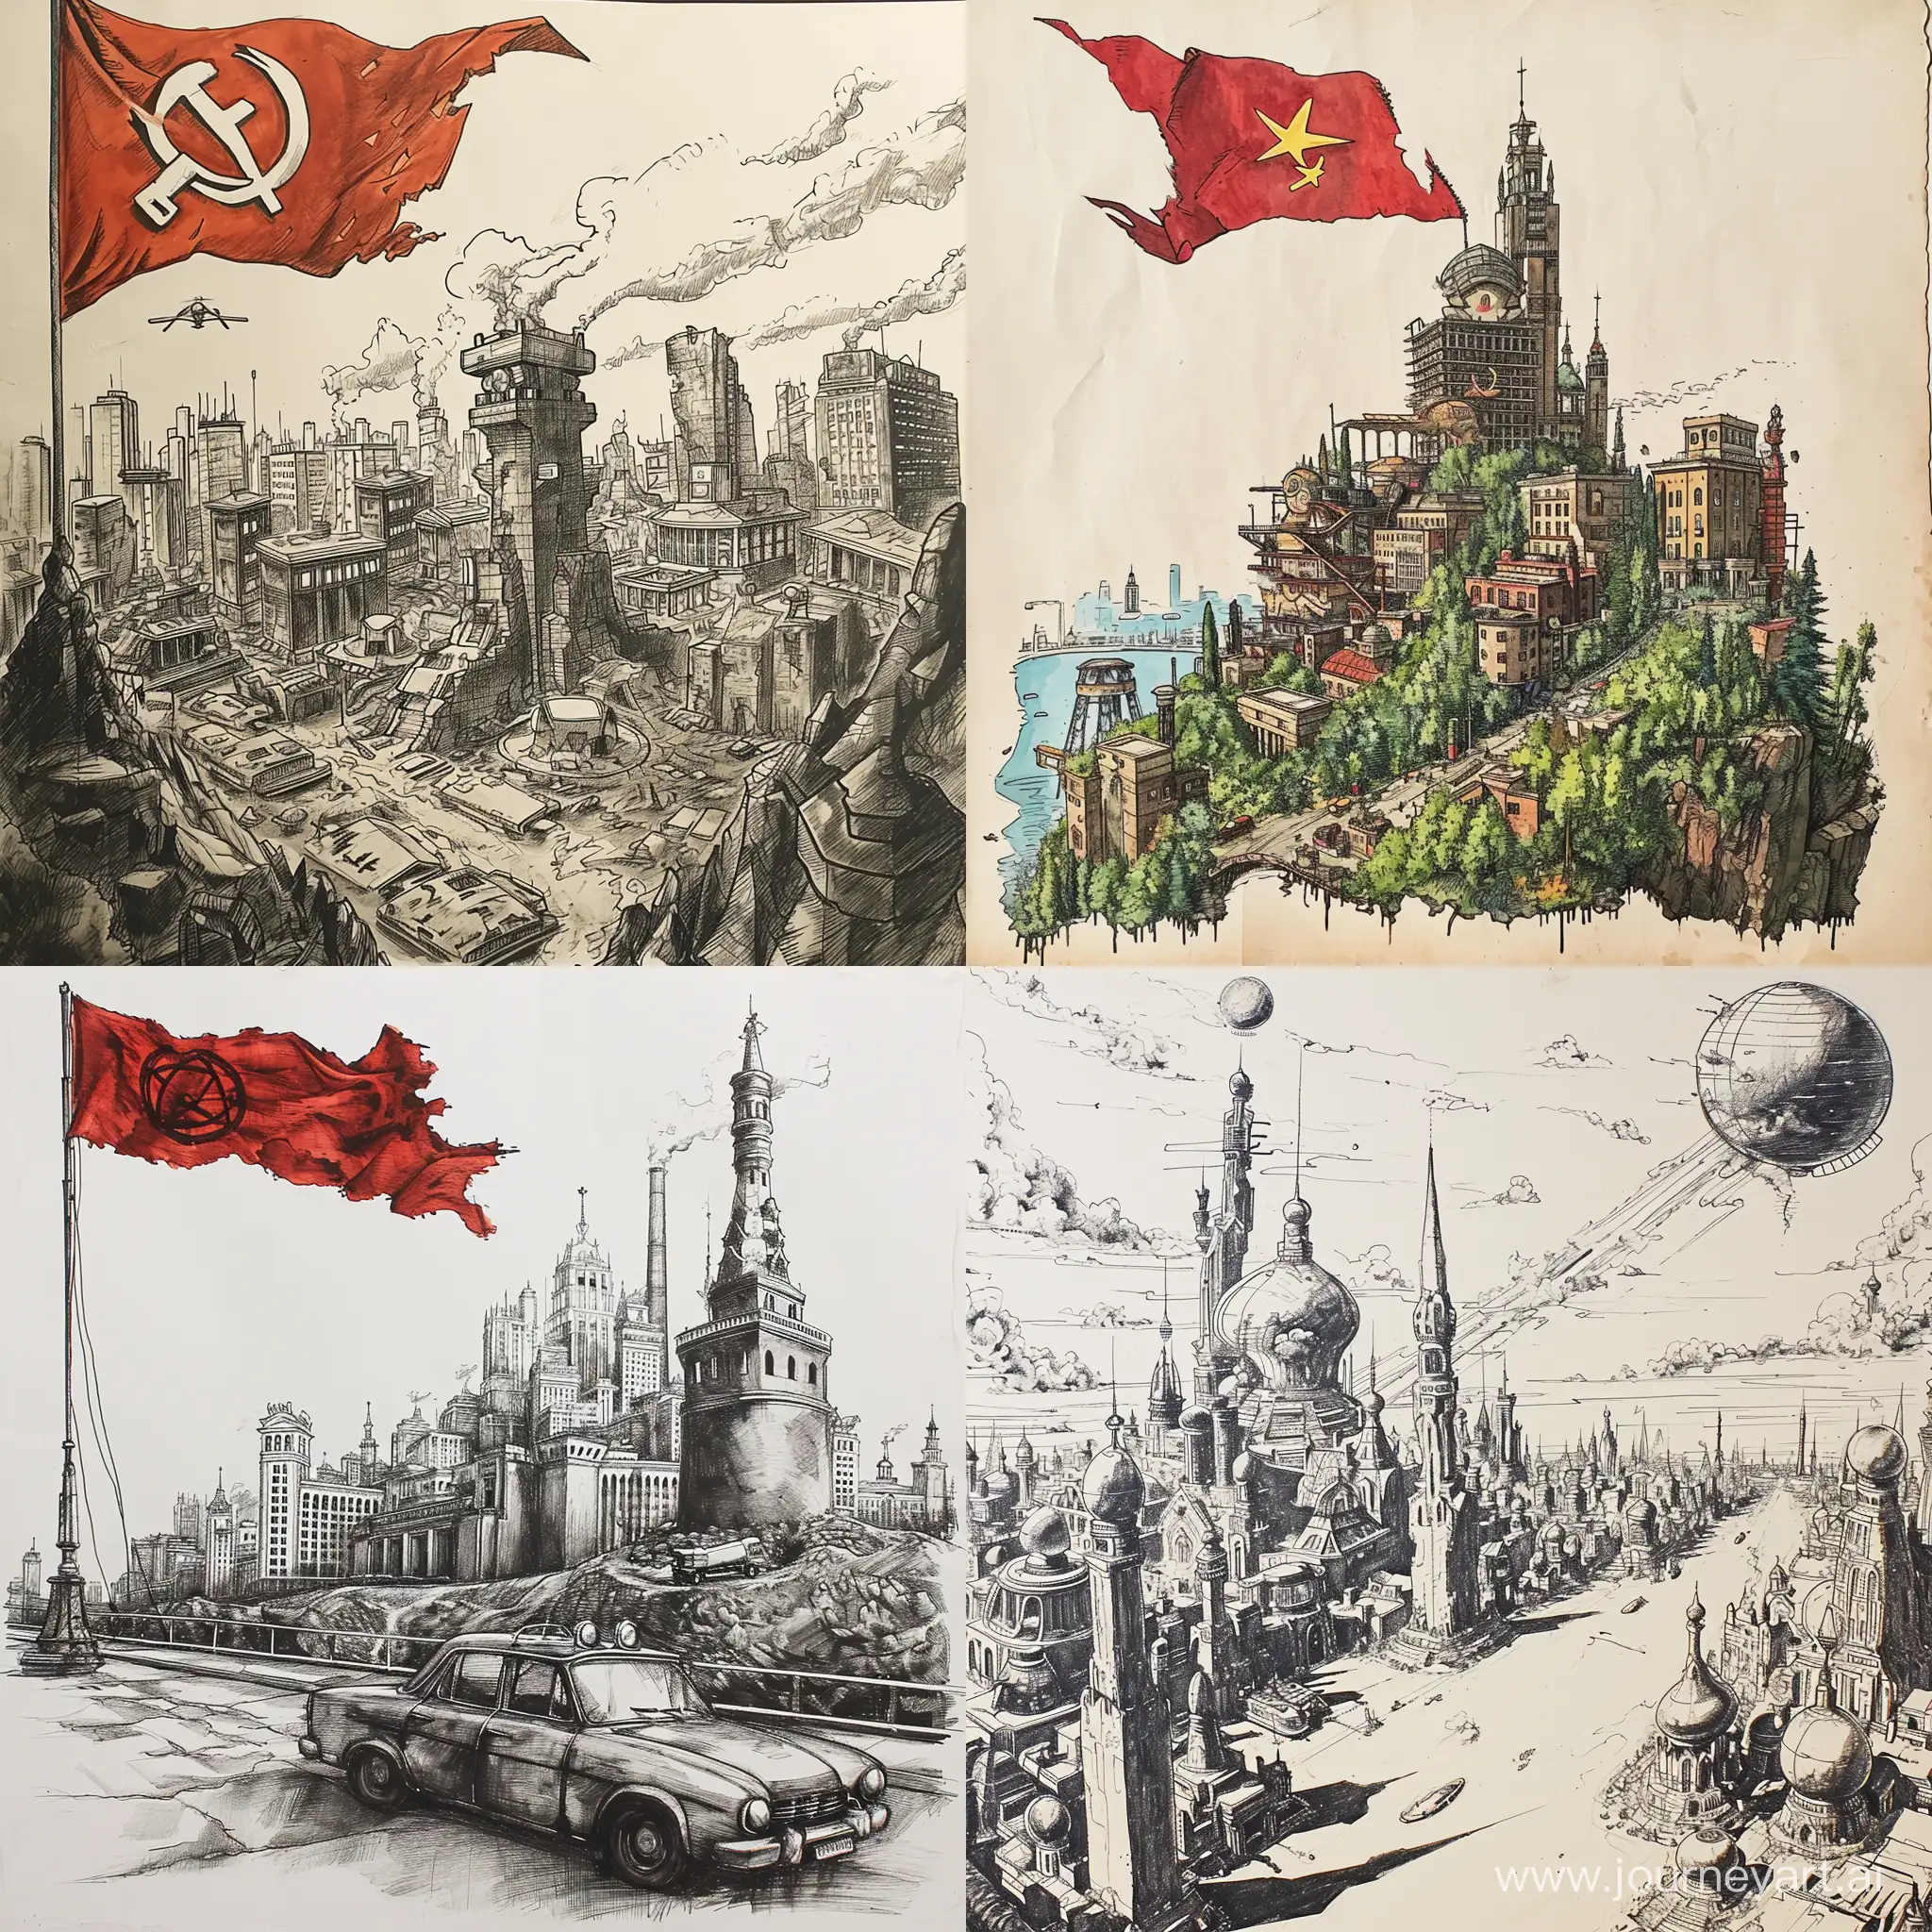 Communist-Utopia-Art-with-Vibrant-Colors-and-Unity